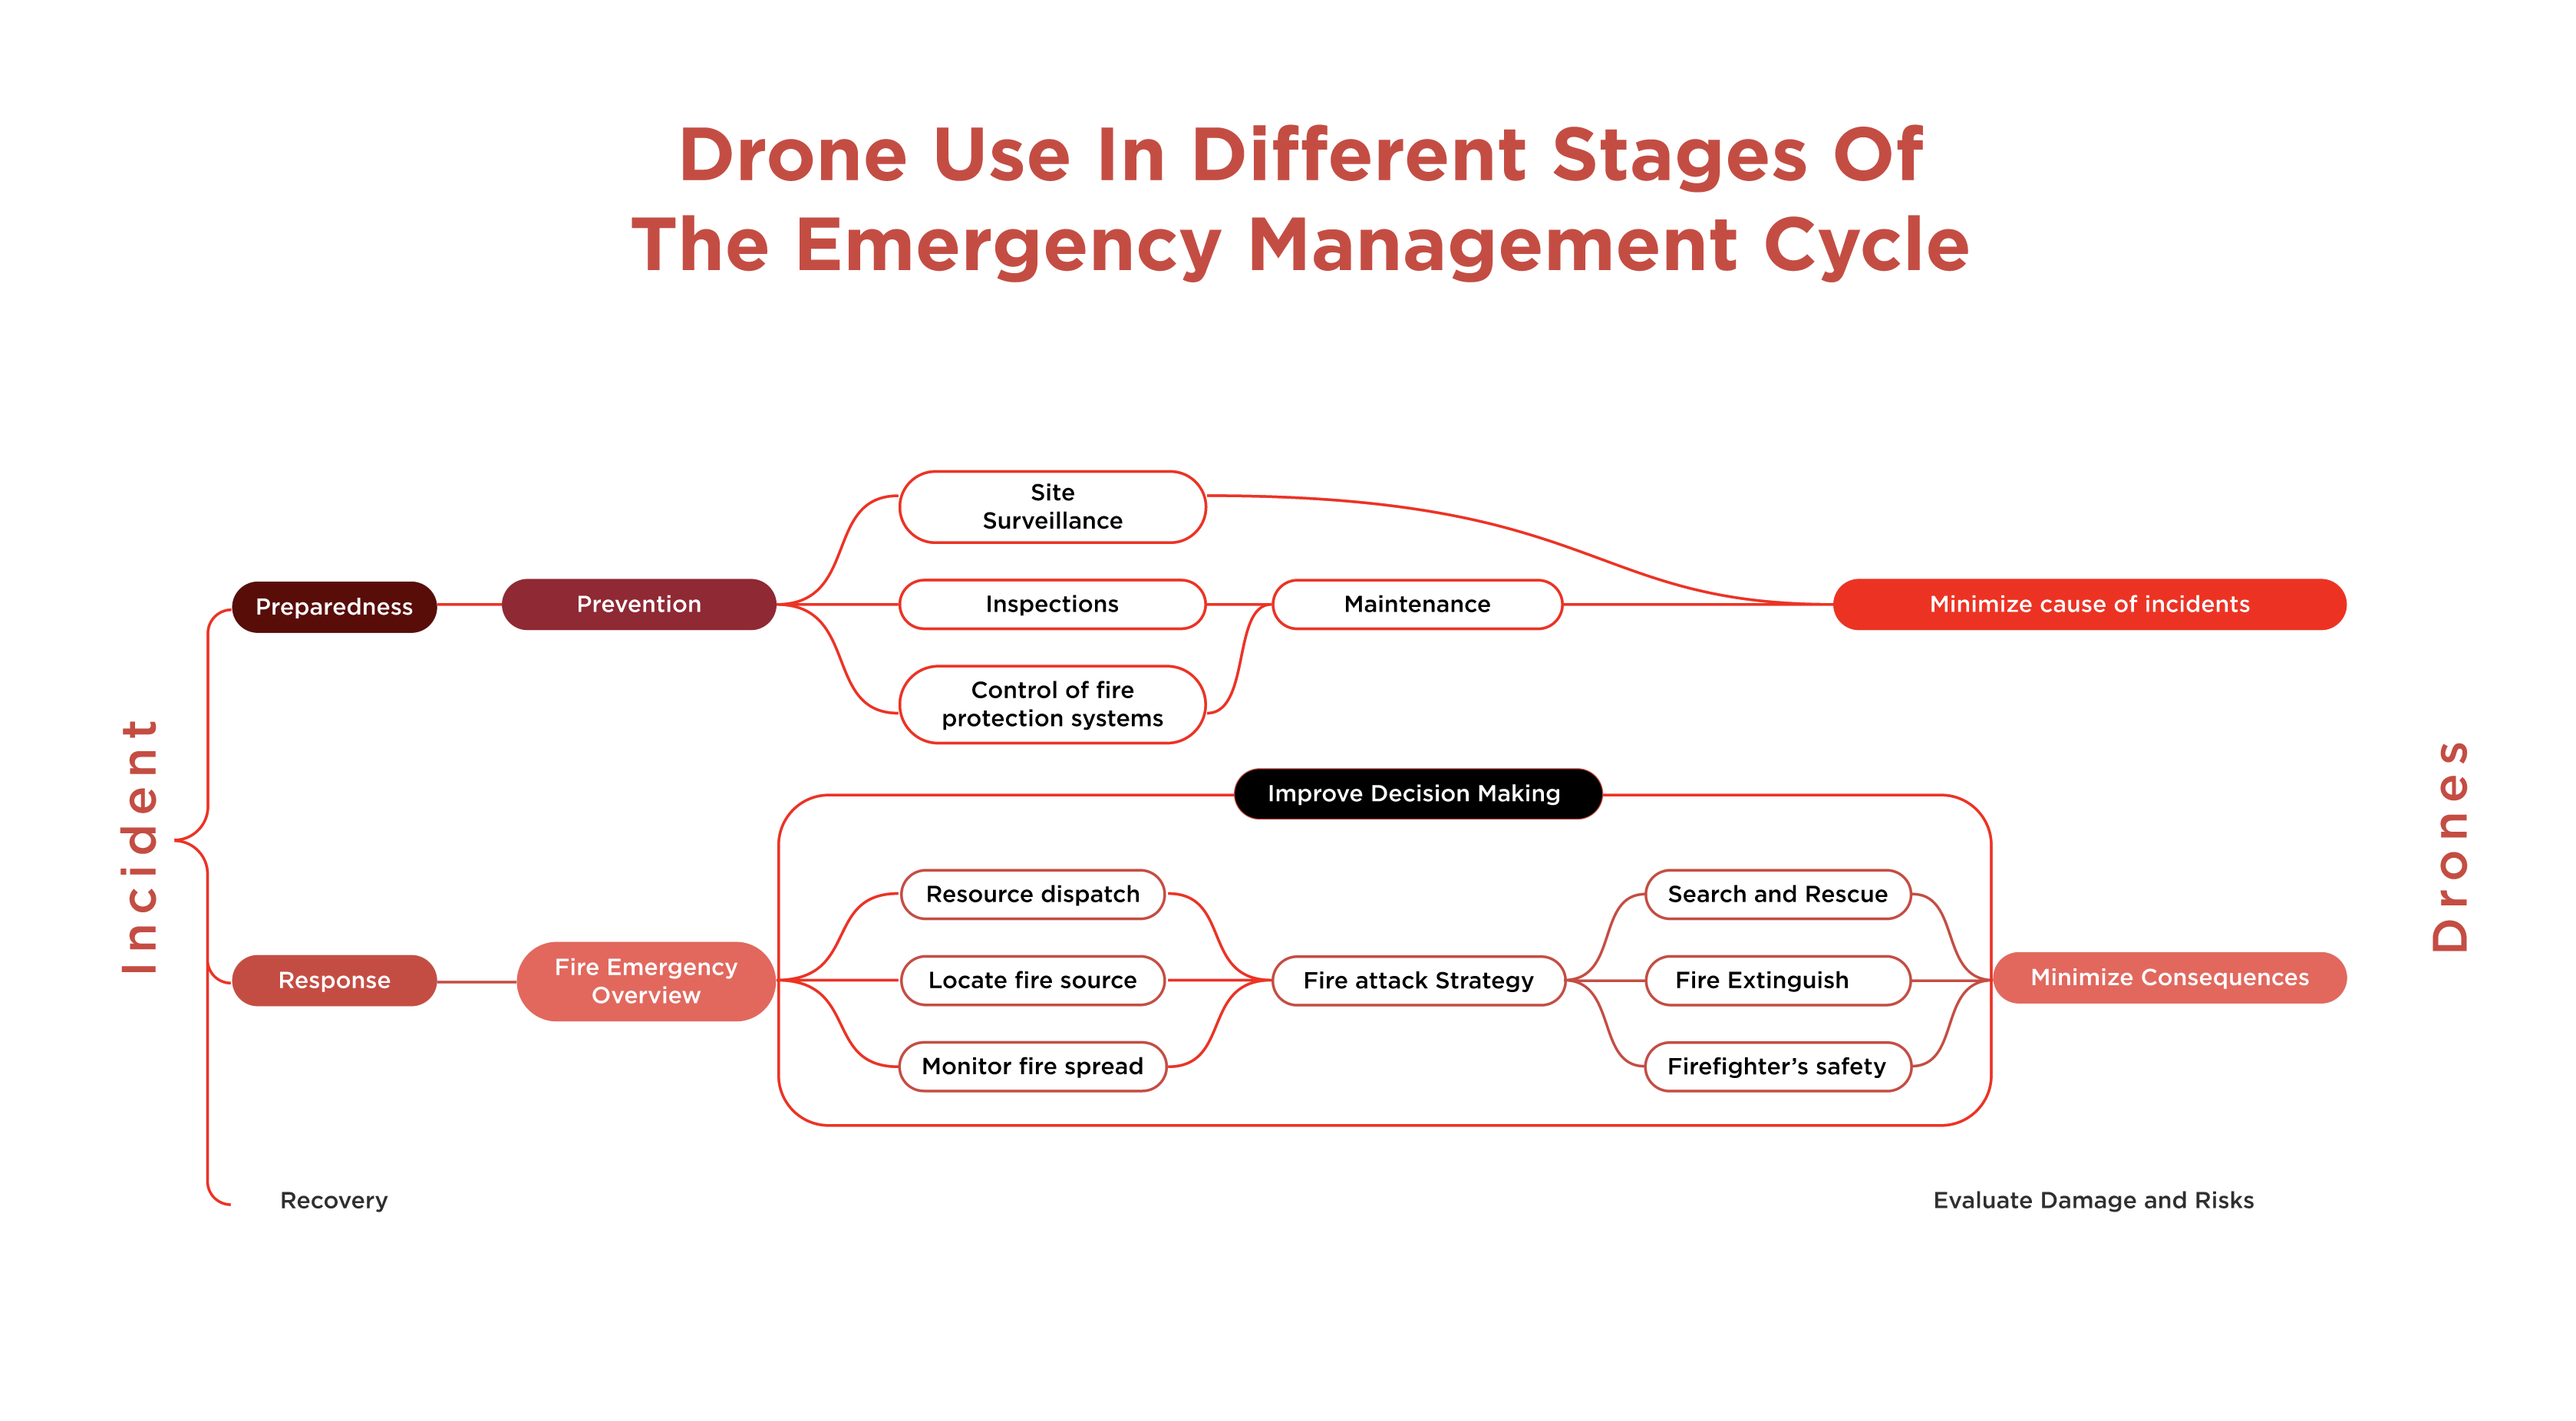 Intro to Drones and Public Safety - landing page image 2